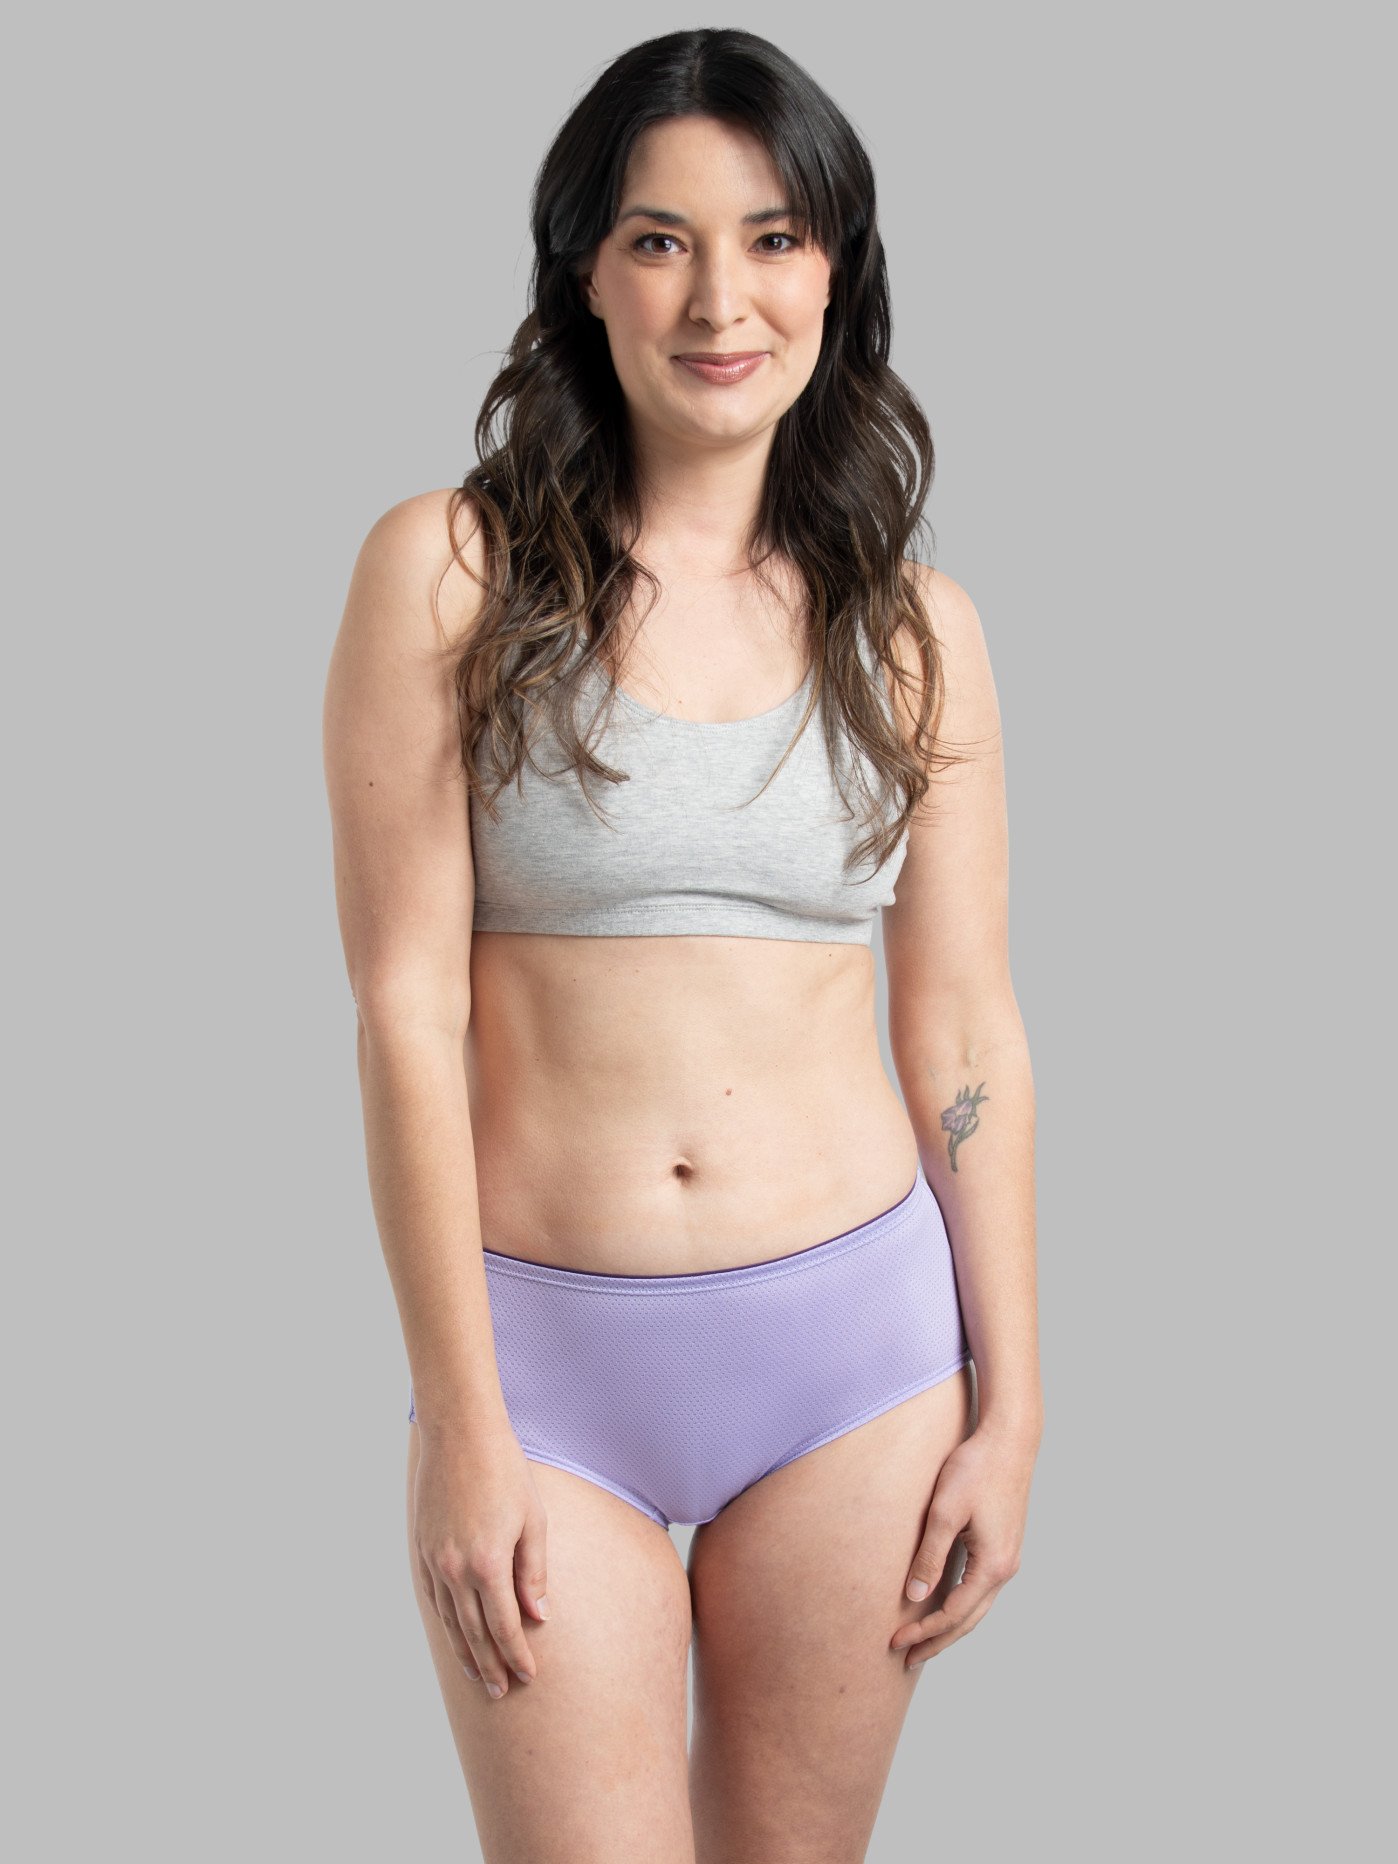 50% OFF SALE Love Is In The Air - Women's Hipster Underwear*